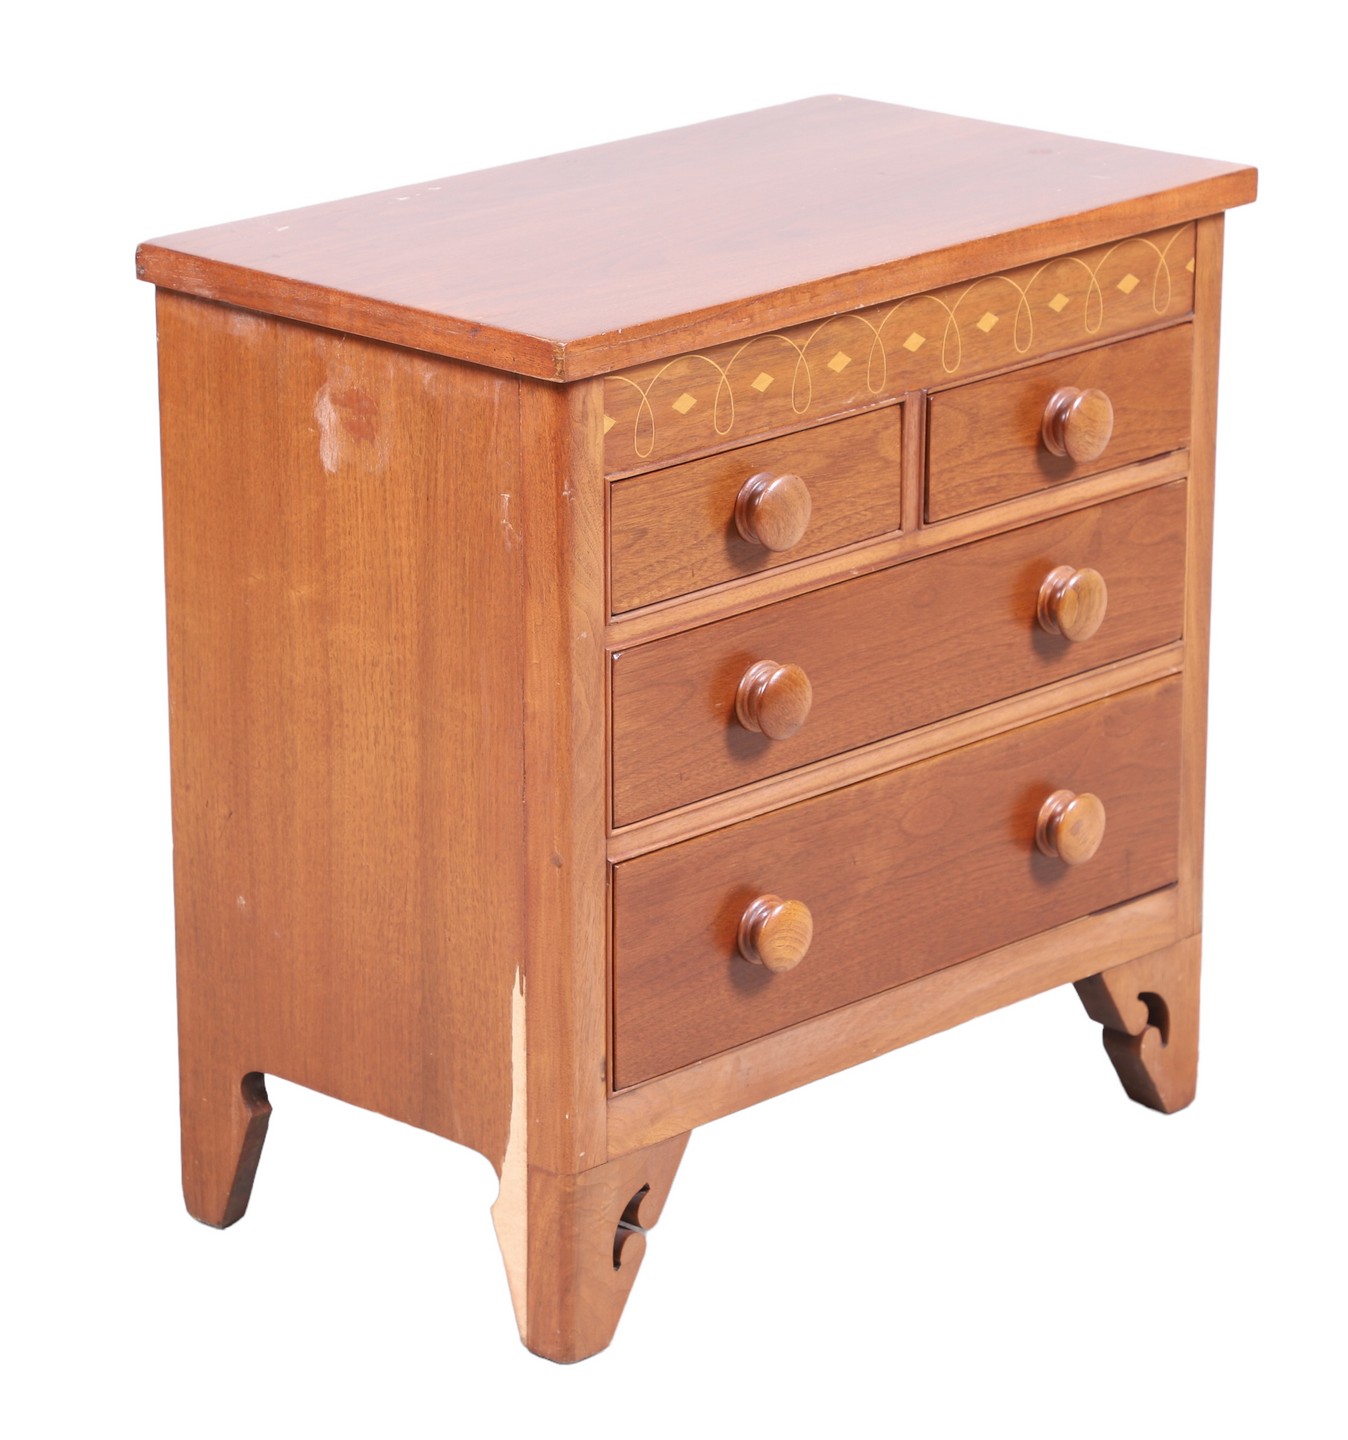 Drexel Cherry inlaid side table, inlaid